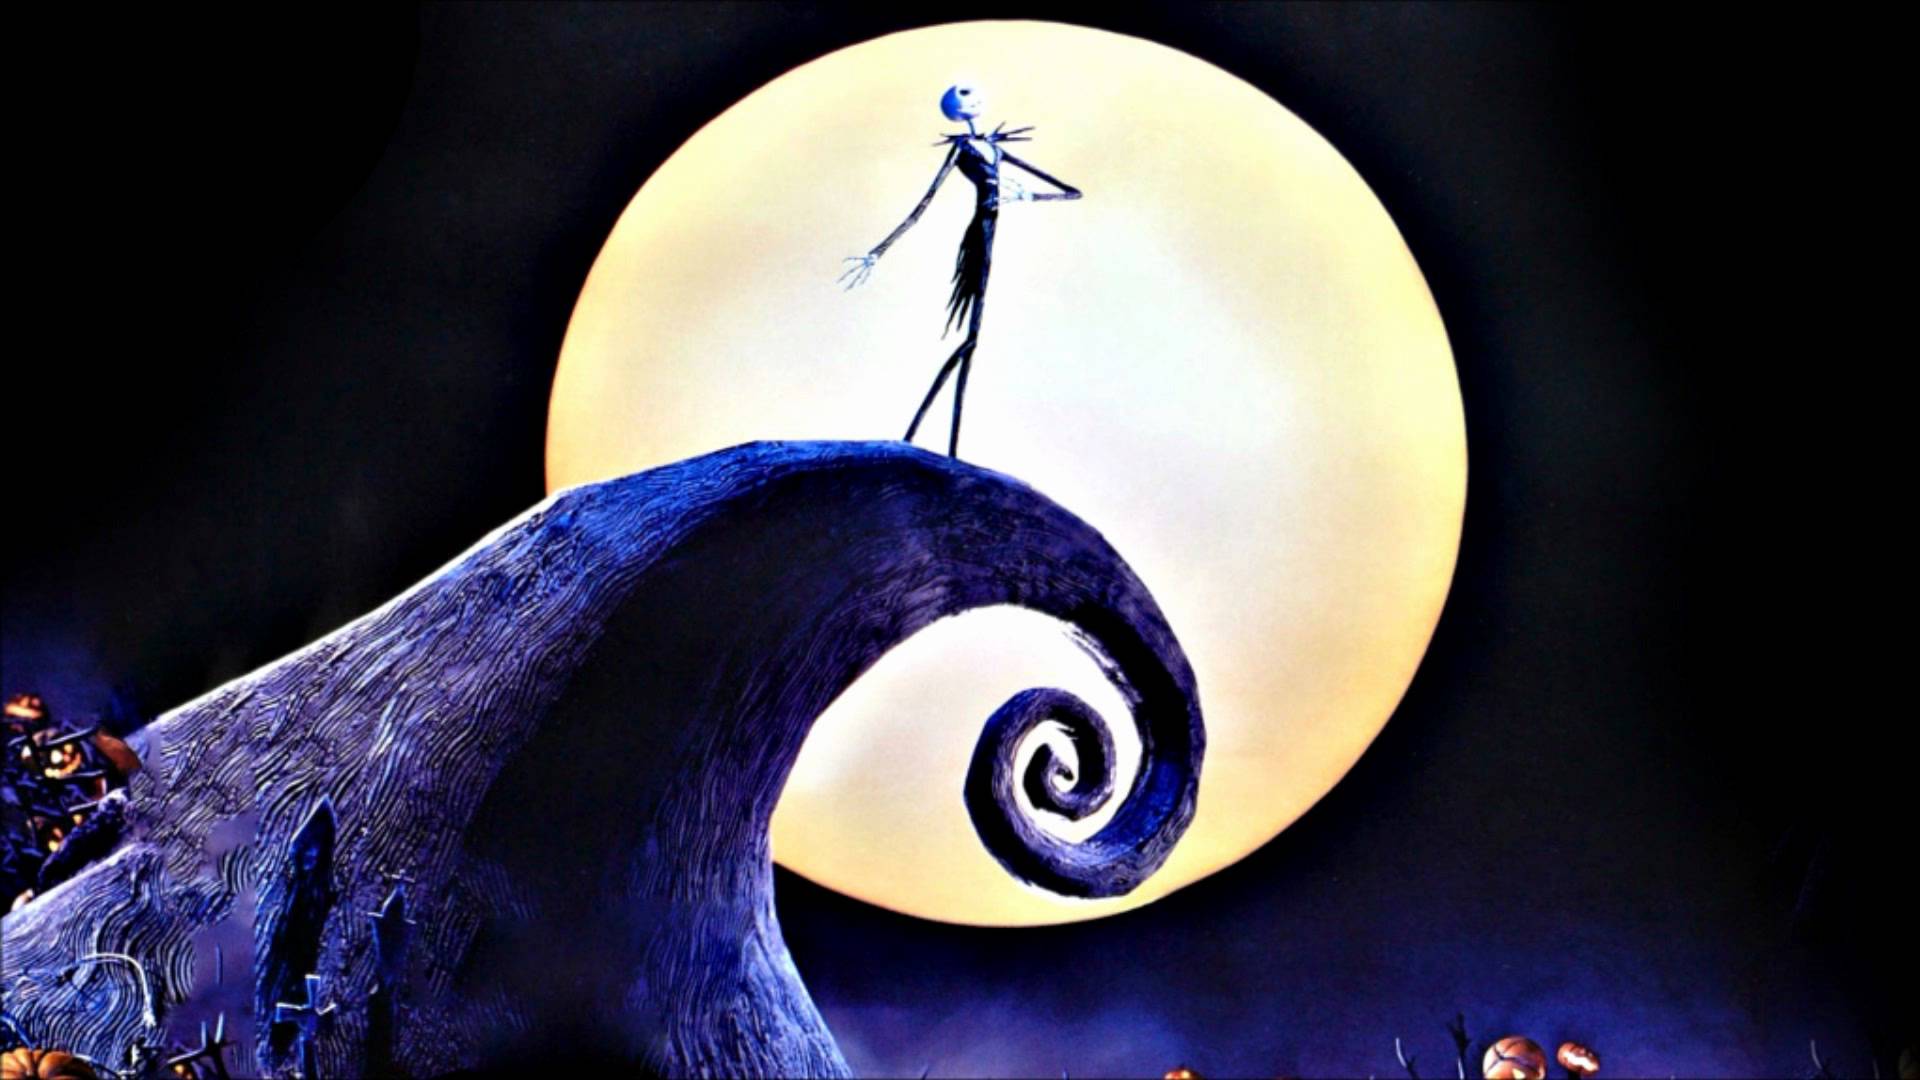 Jack and sally wallpaper